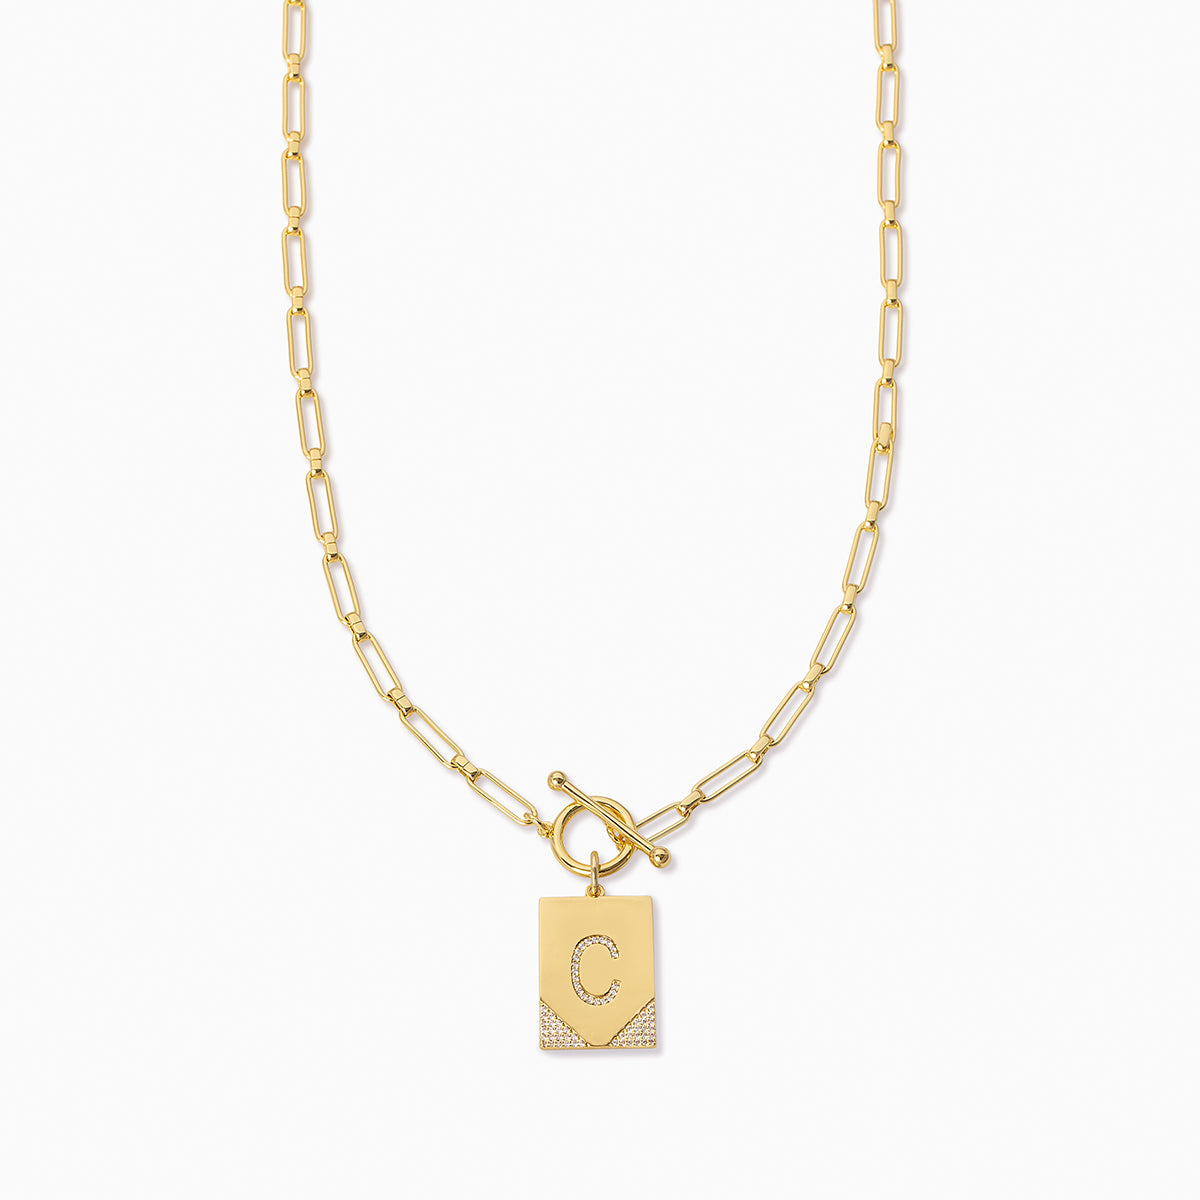 Leave Your Mark Chain Necklace | Gold  C | Product Image | Uncommon James